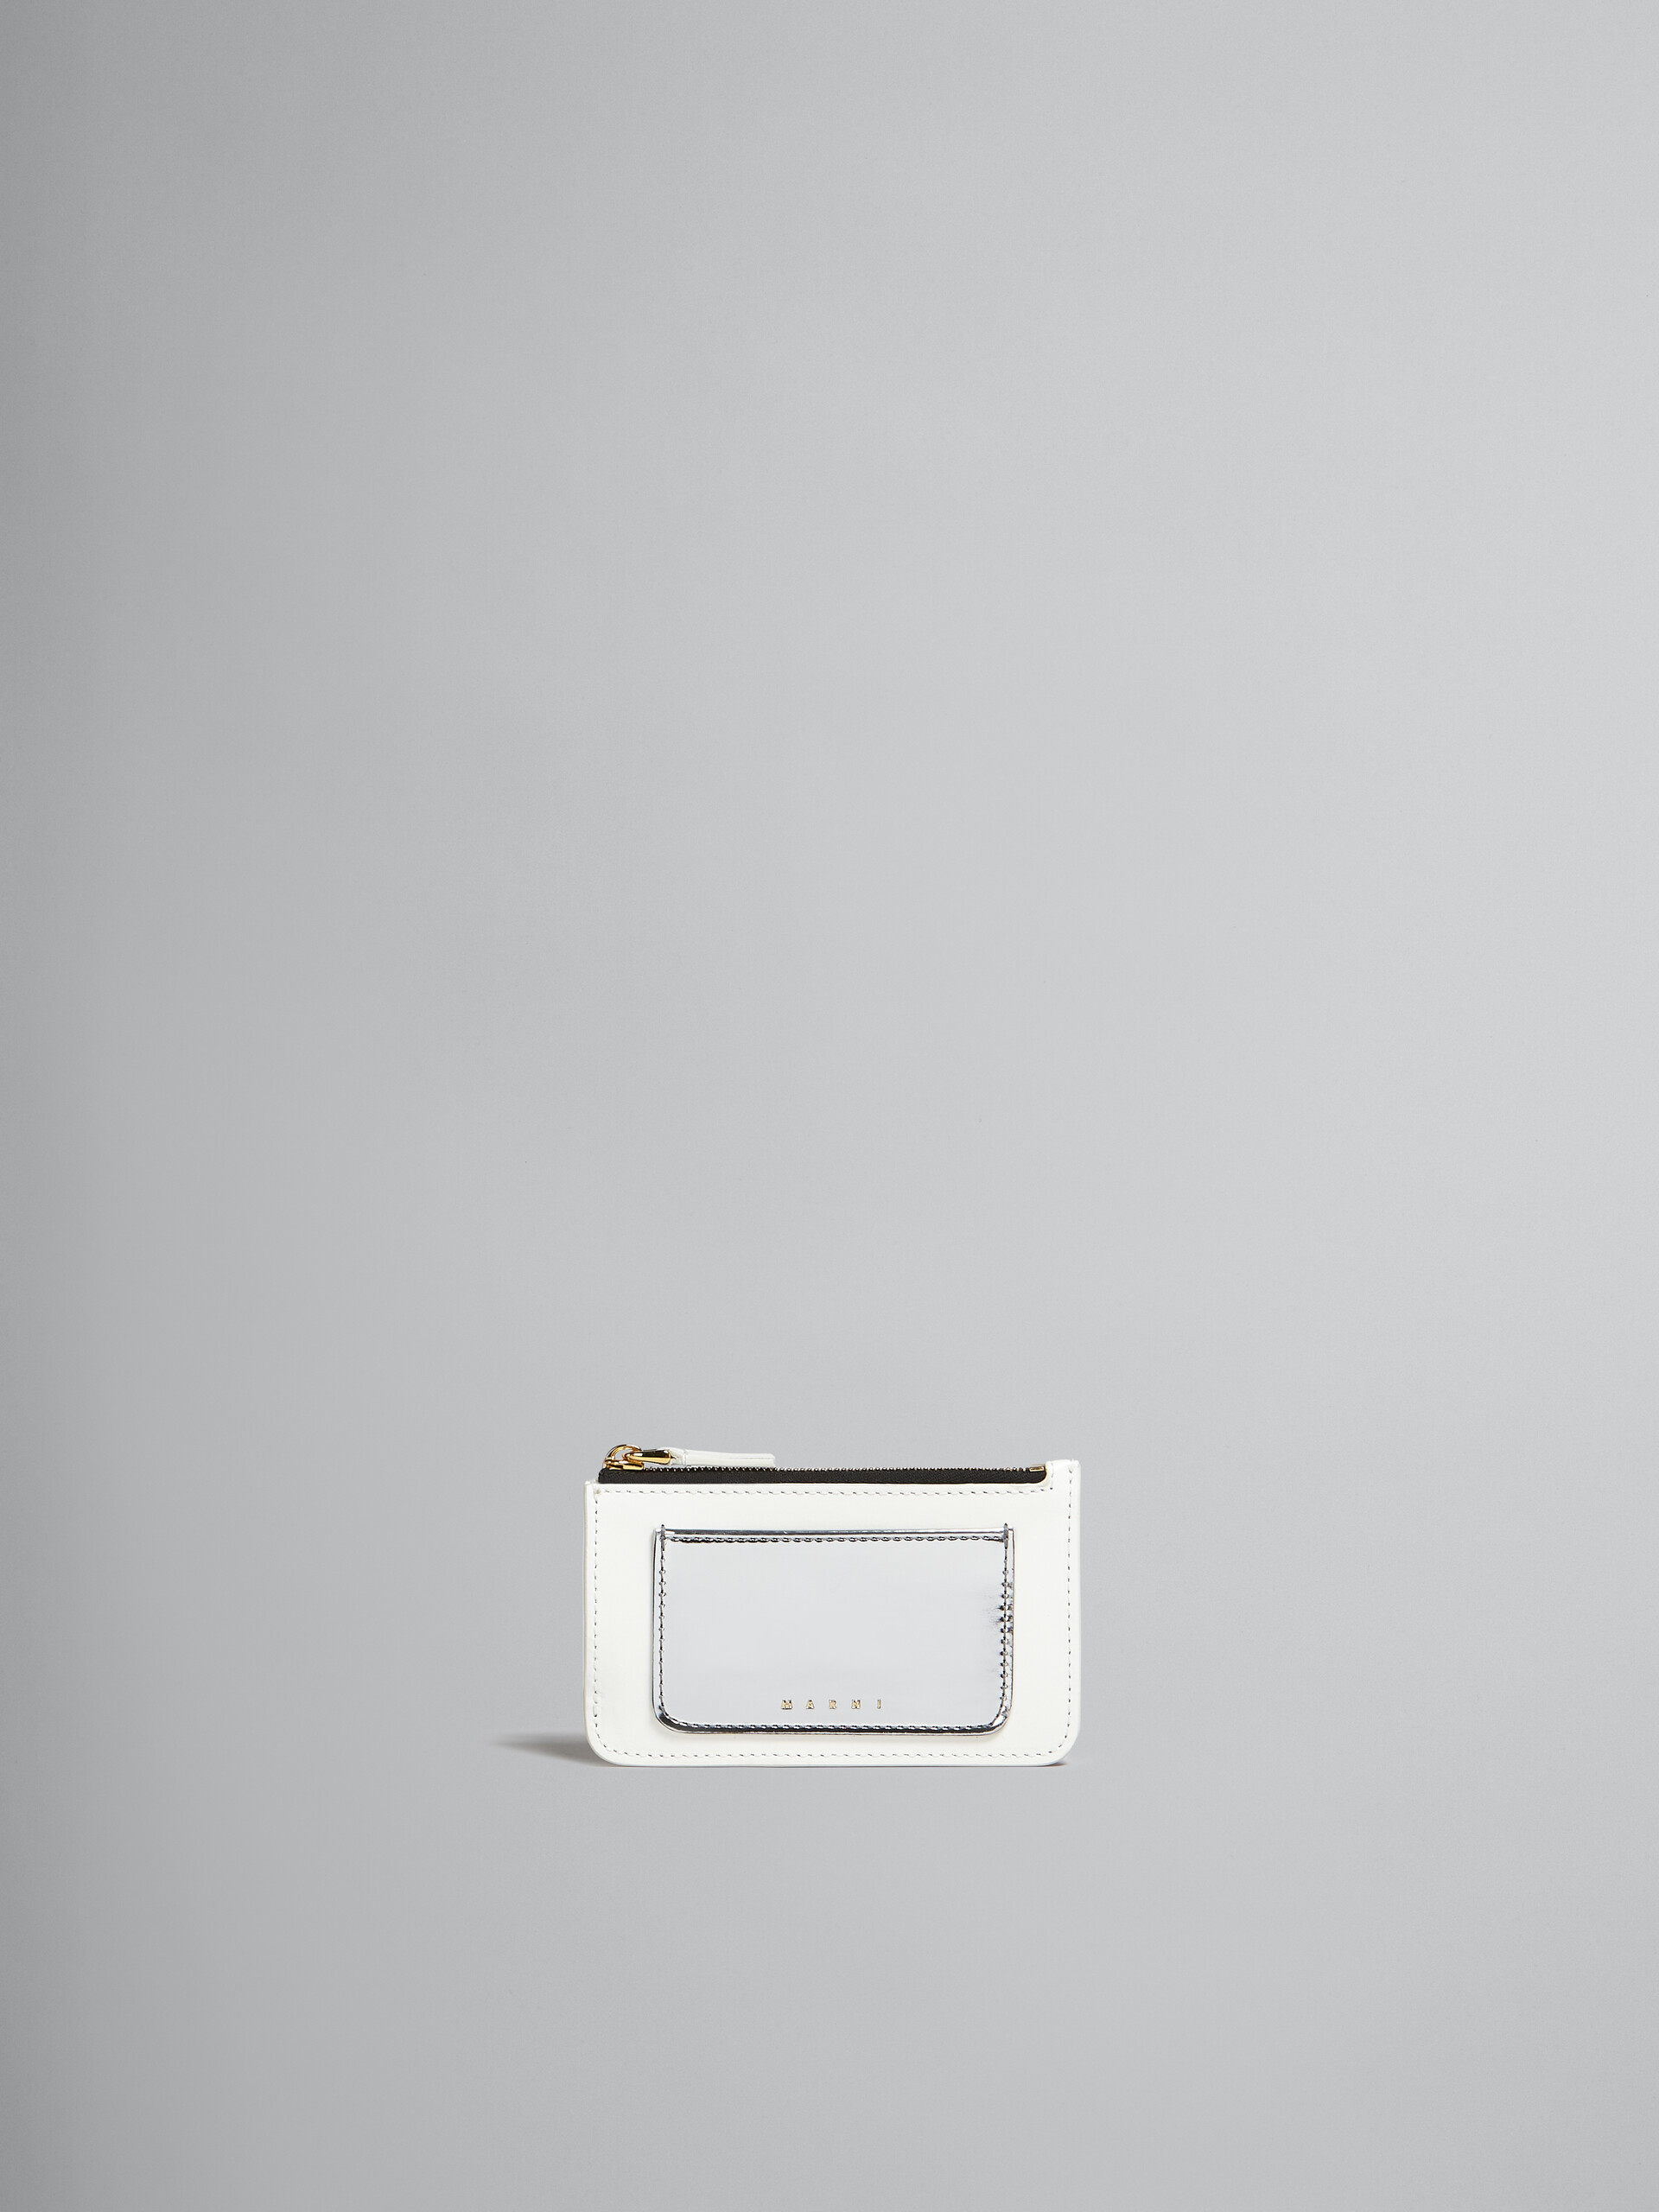 White and silver leather card holder - Wallets - Image 1